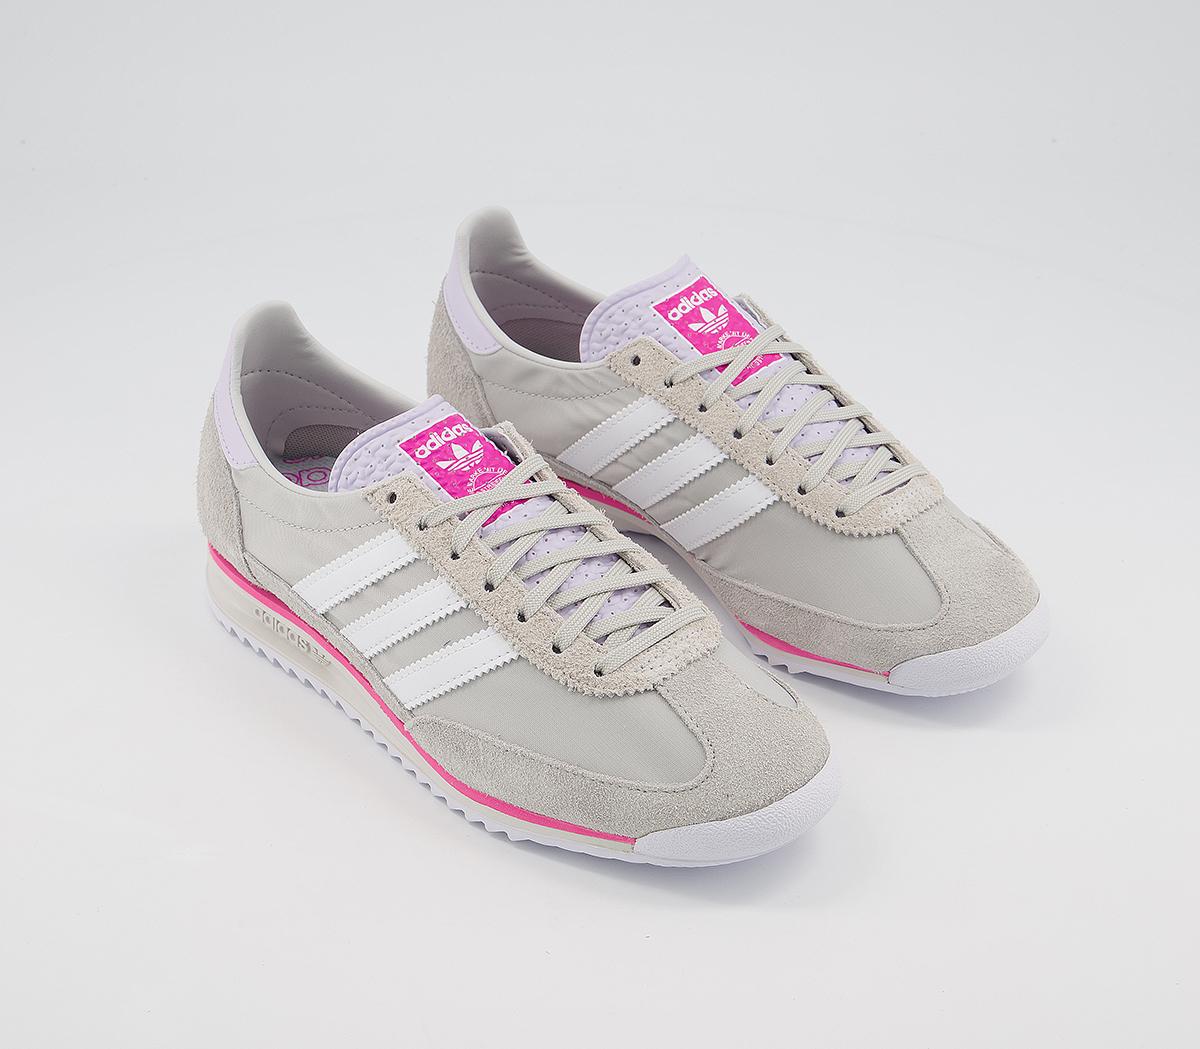 adidas Sl 72 Trainers Grey One White Grey Two - Women's Trainers